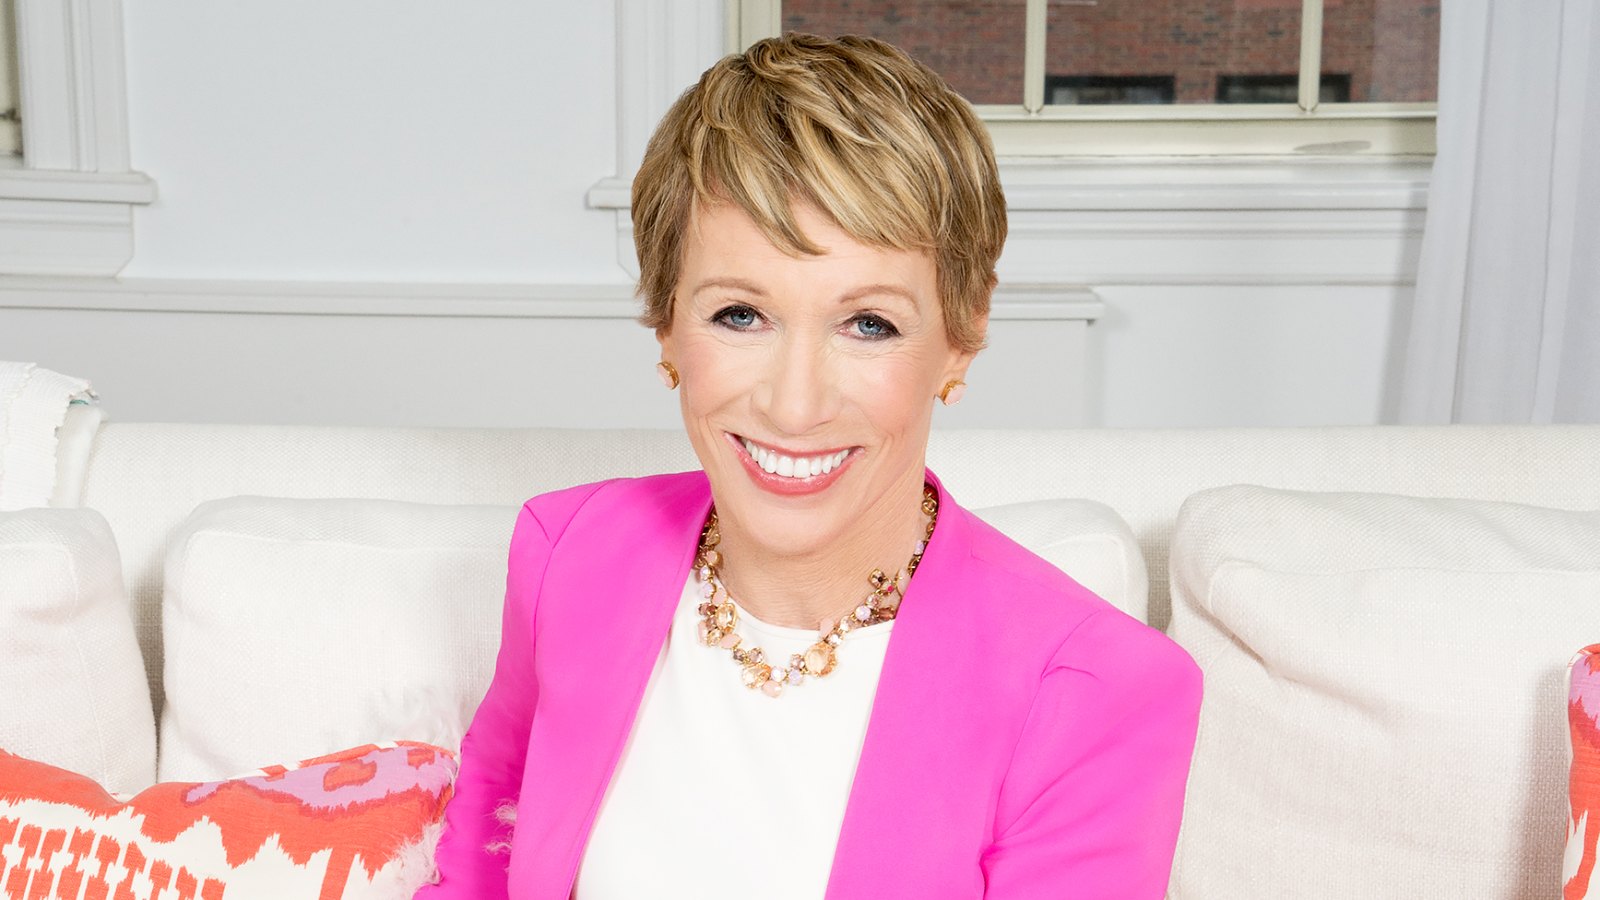 Barbara Corcoran poses for Resident Magazine on April 7, 2016 in New York City.